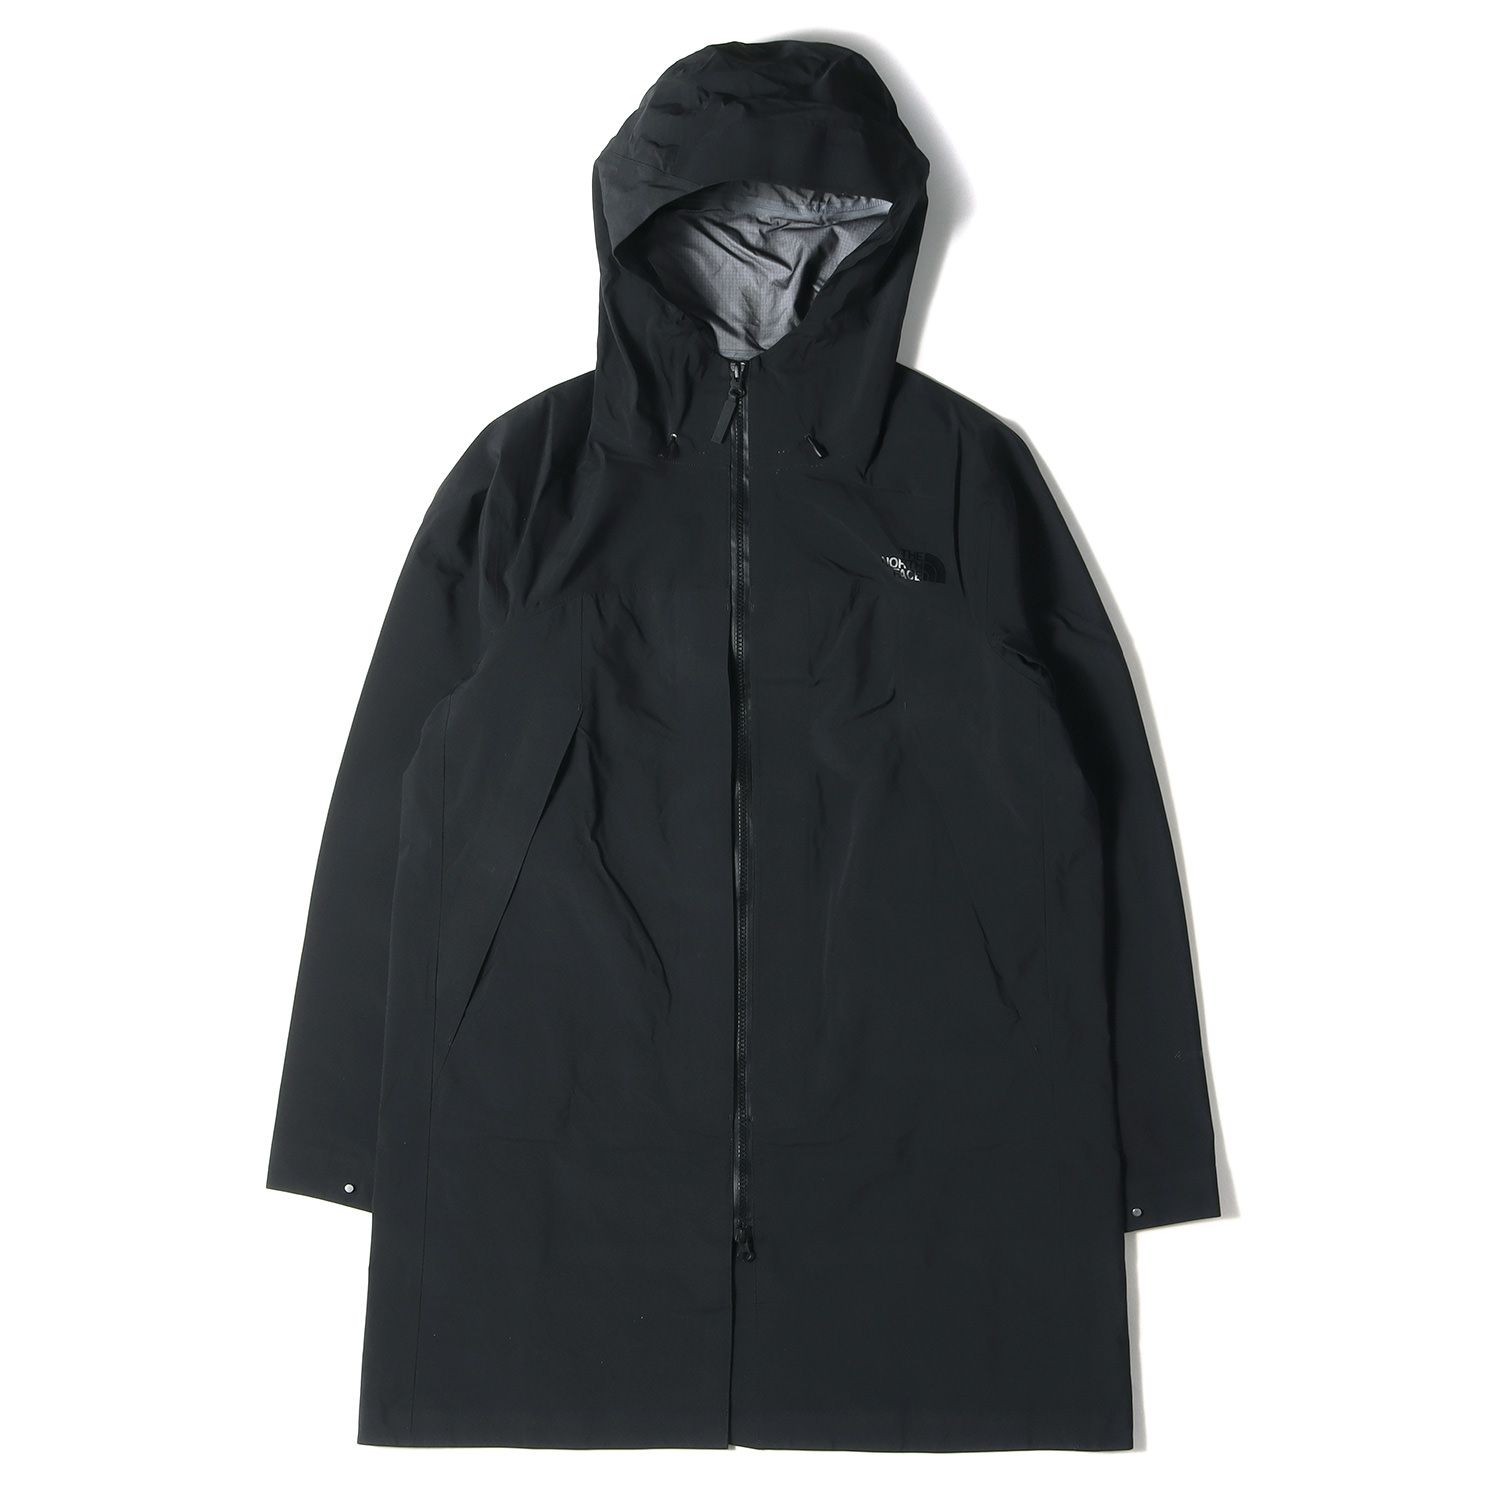 THE NORTH FACE - THE NORTH FACE ノースフェイス NP61961 GADGET